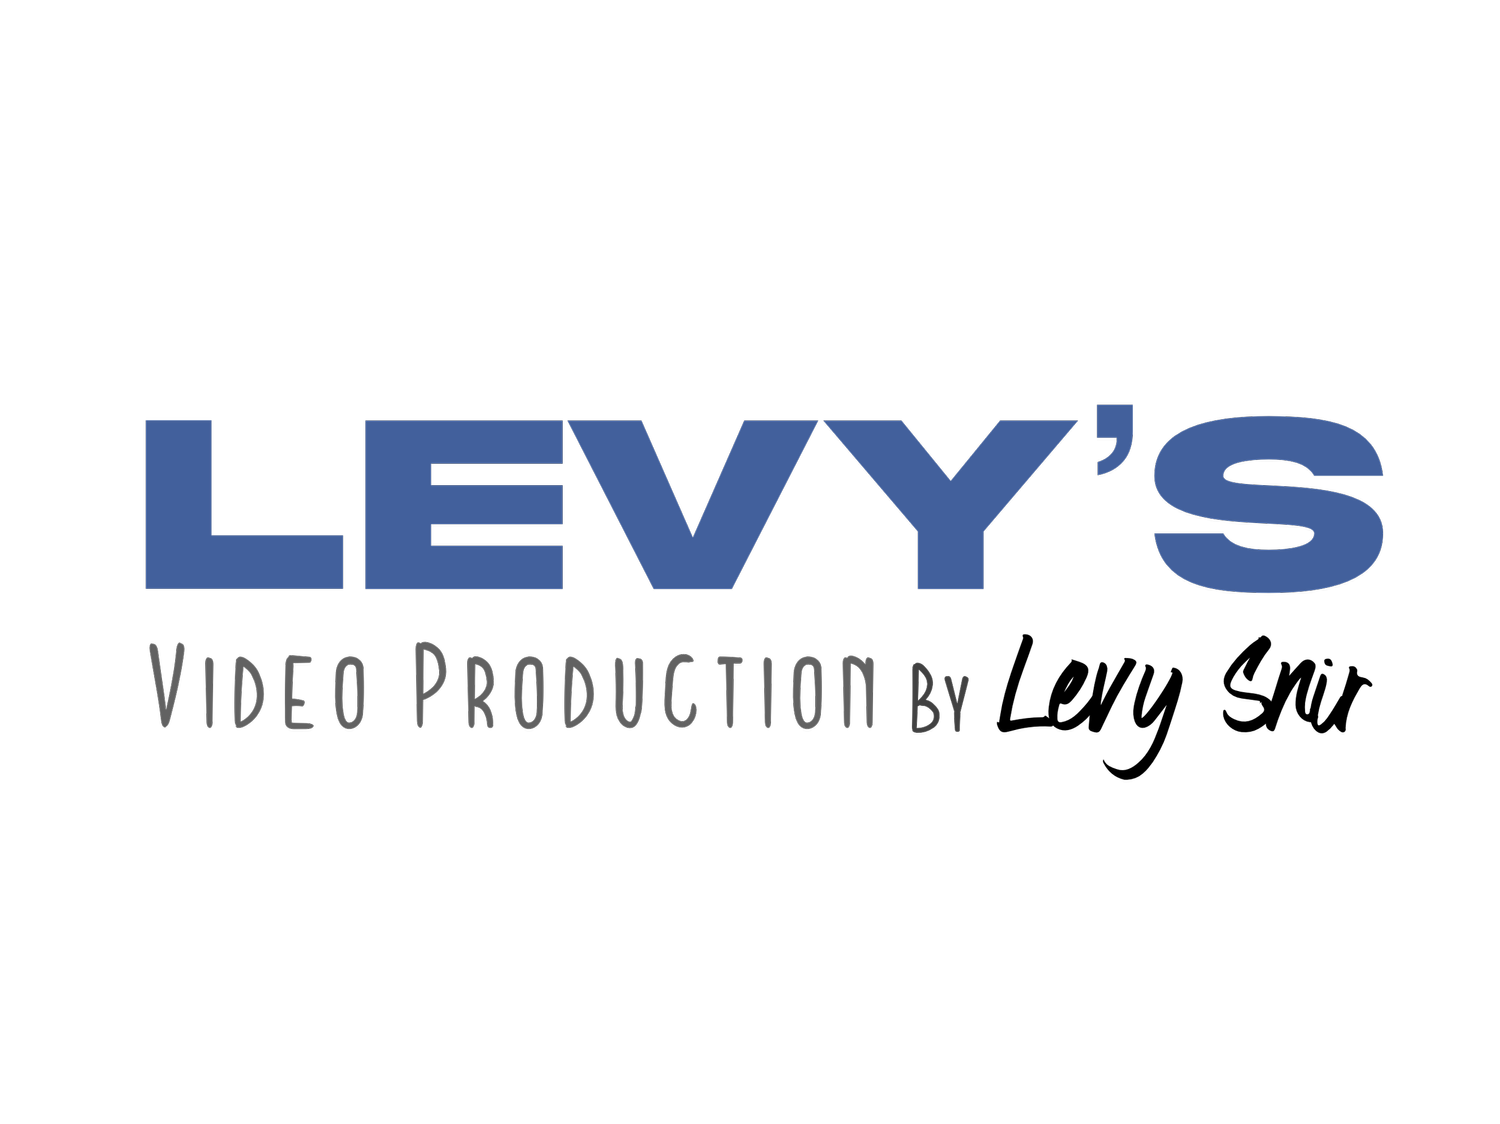 Levys Video Production